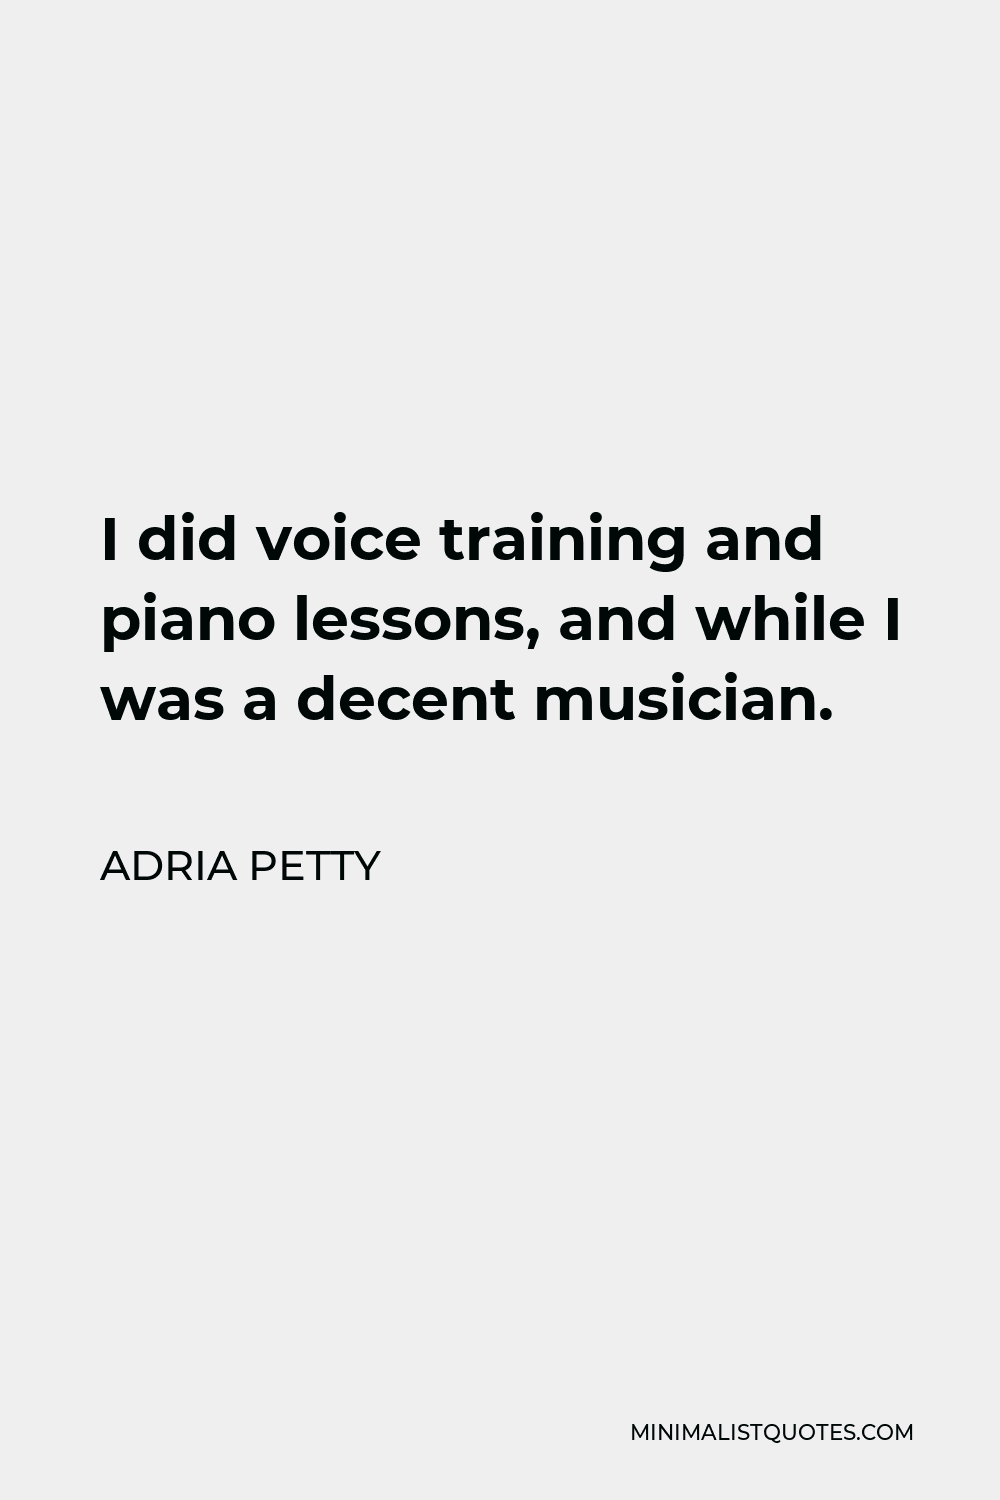 Adria Petty Quote - I did voice training and piano lessons, and while I was a decent musician.